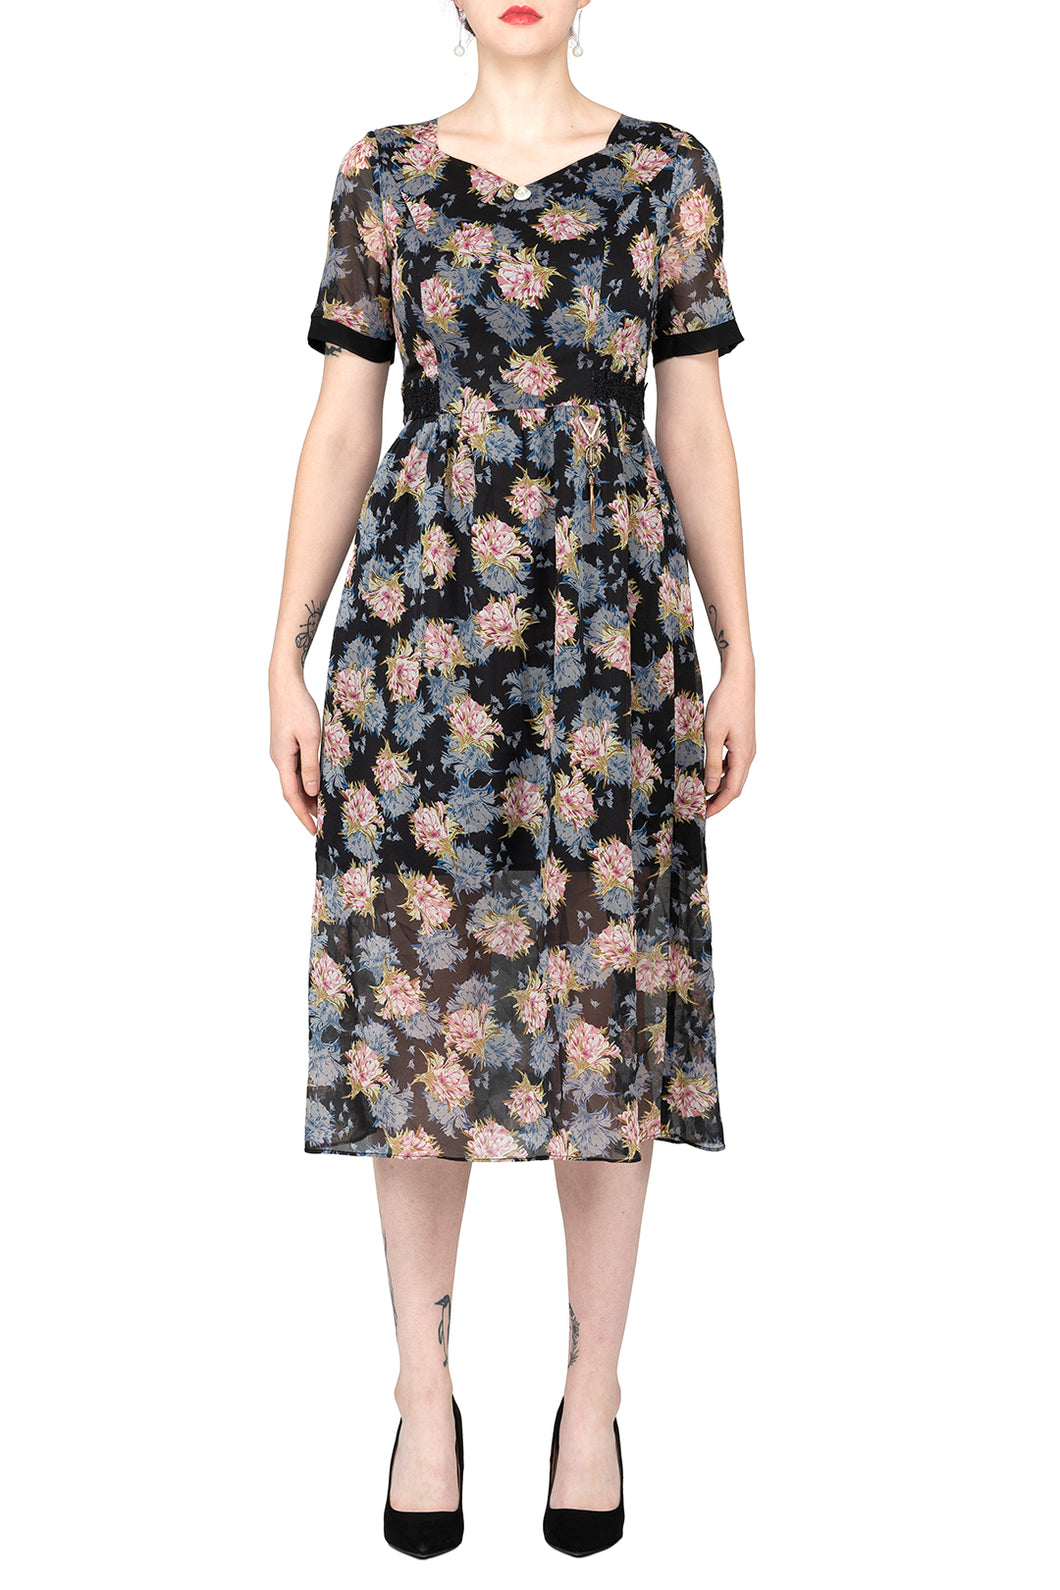 TWO PEARS-Flowy Floral Print Dress